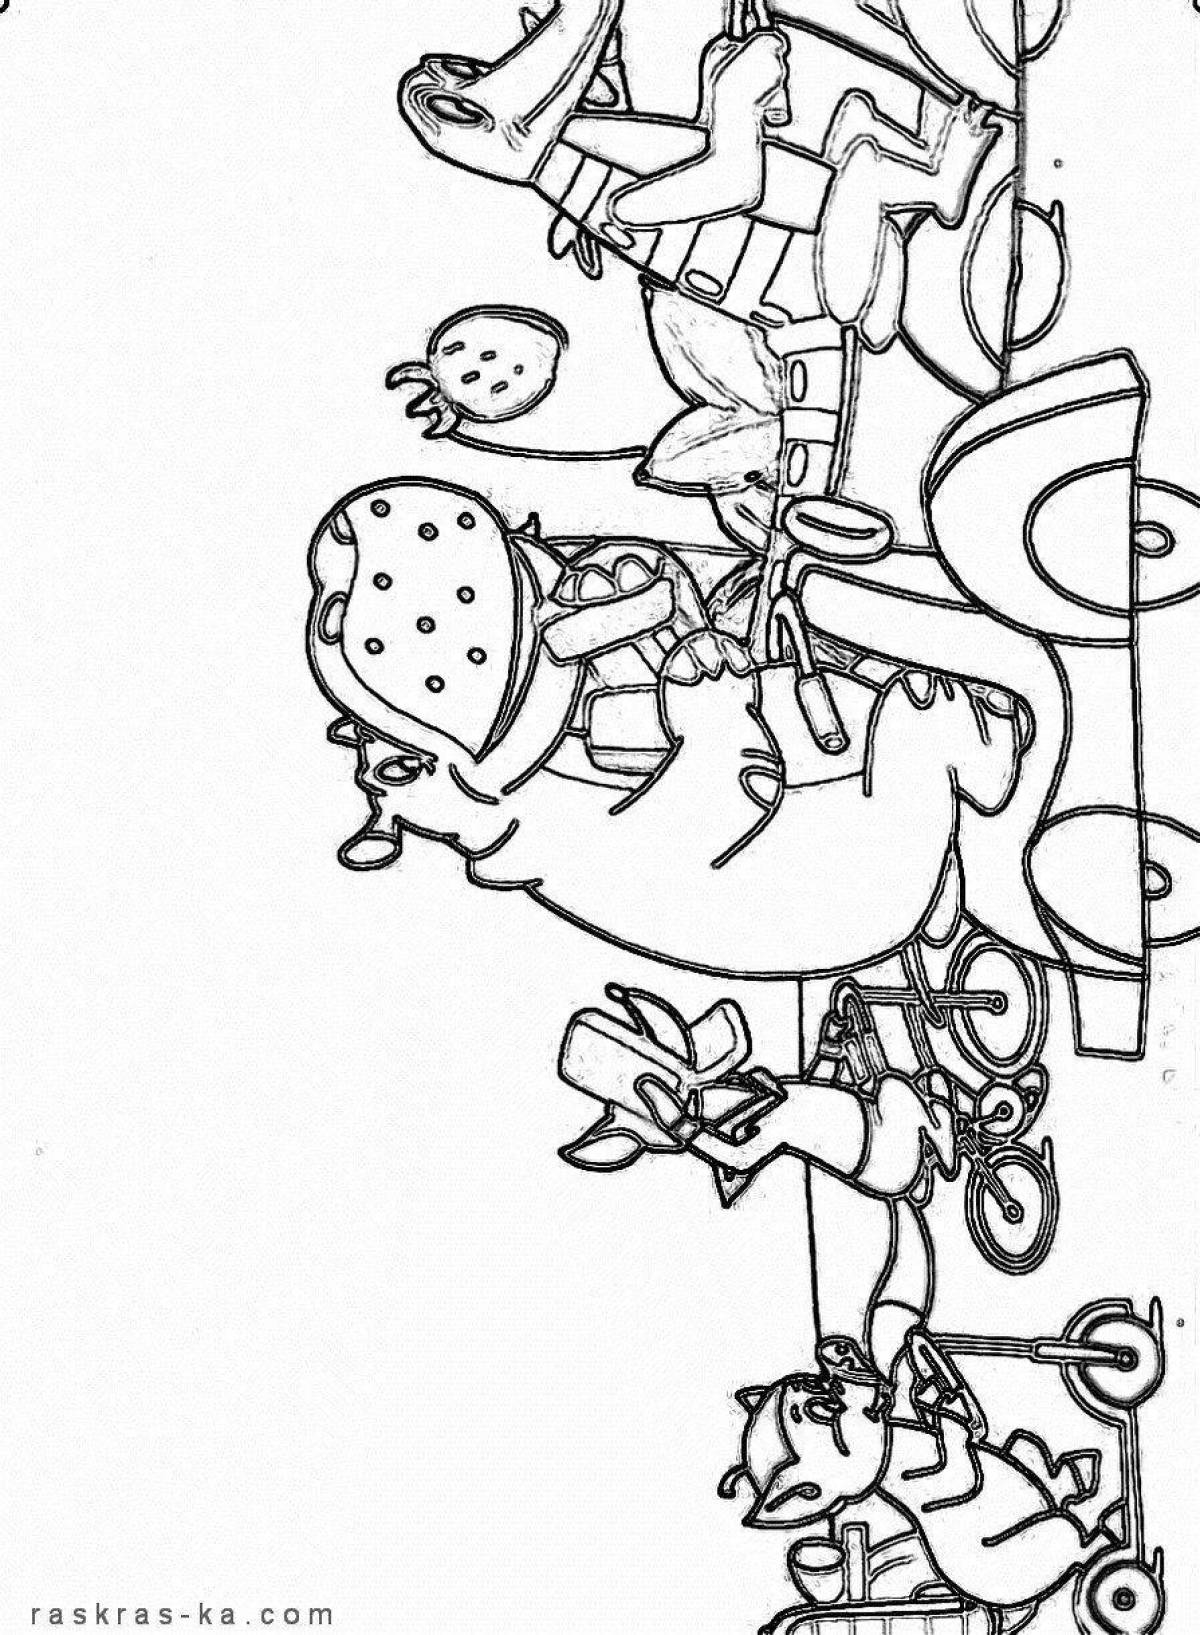 Coloring book charming cockroach Chukovsky